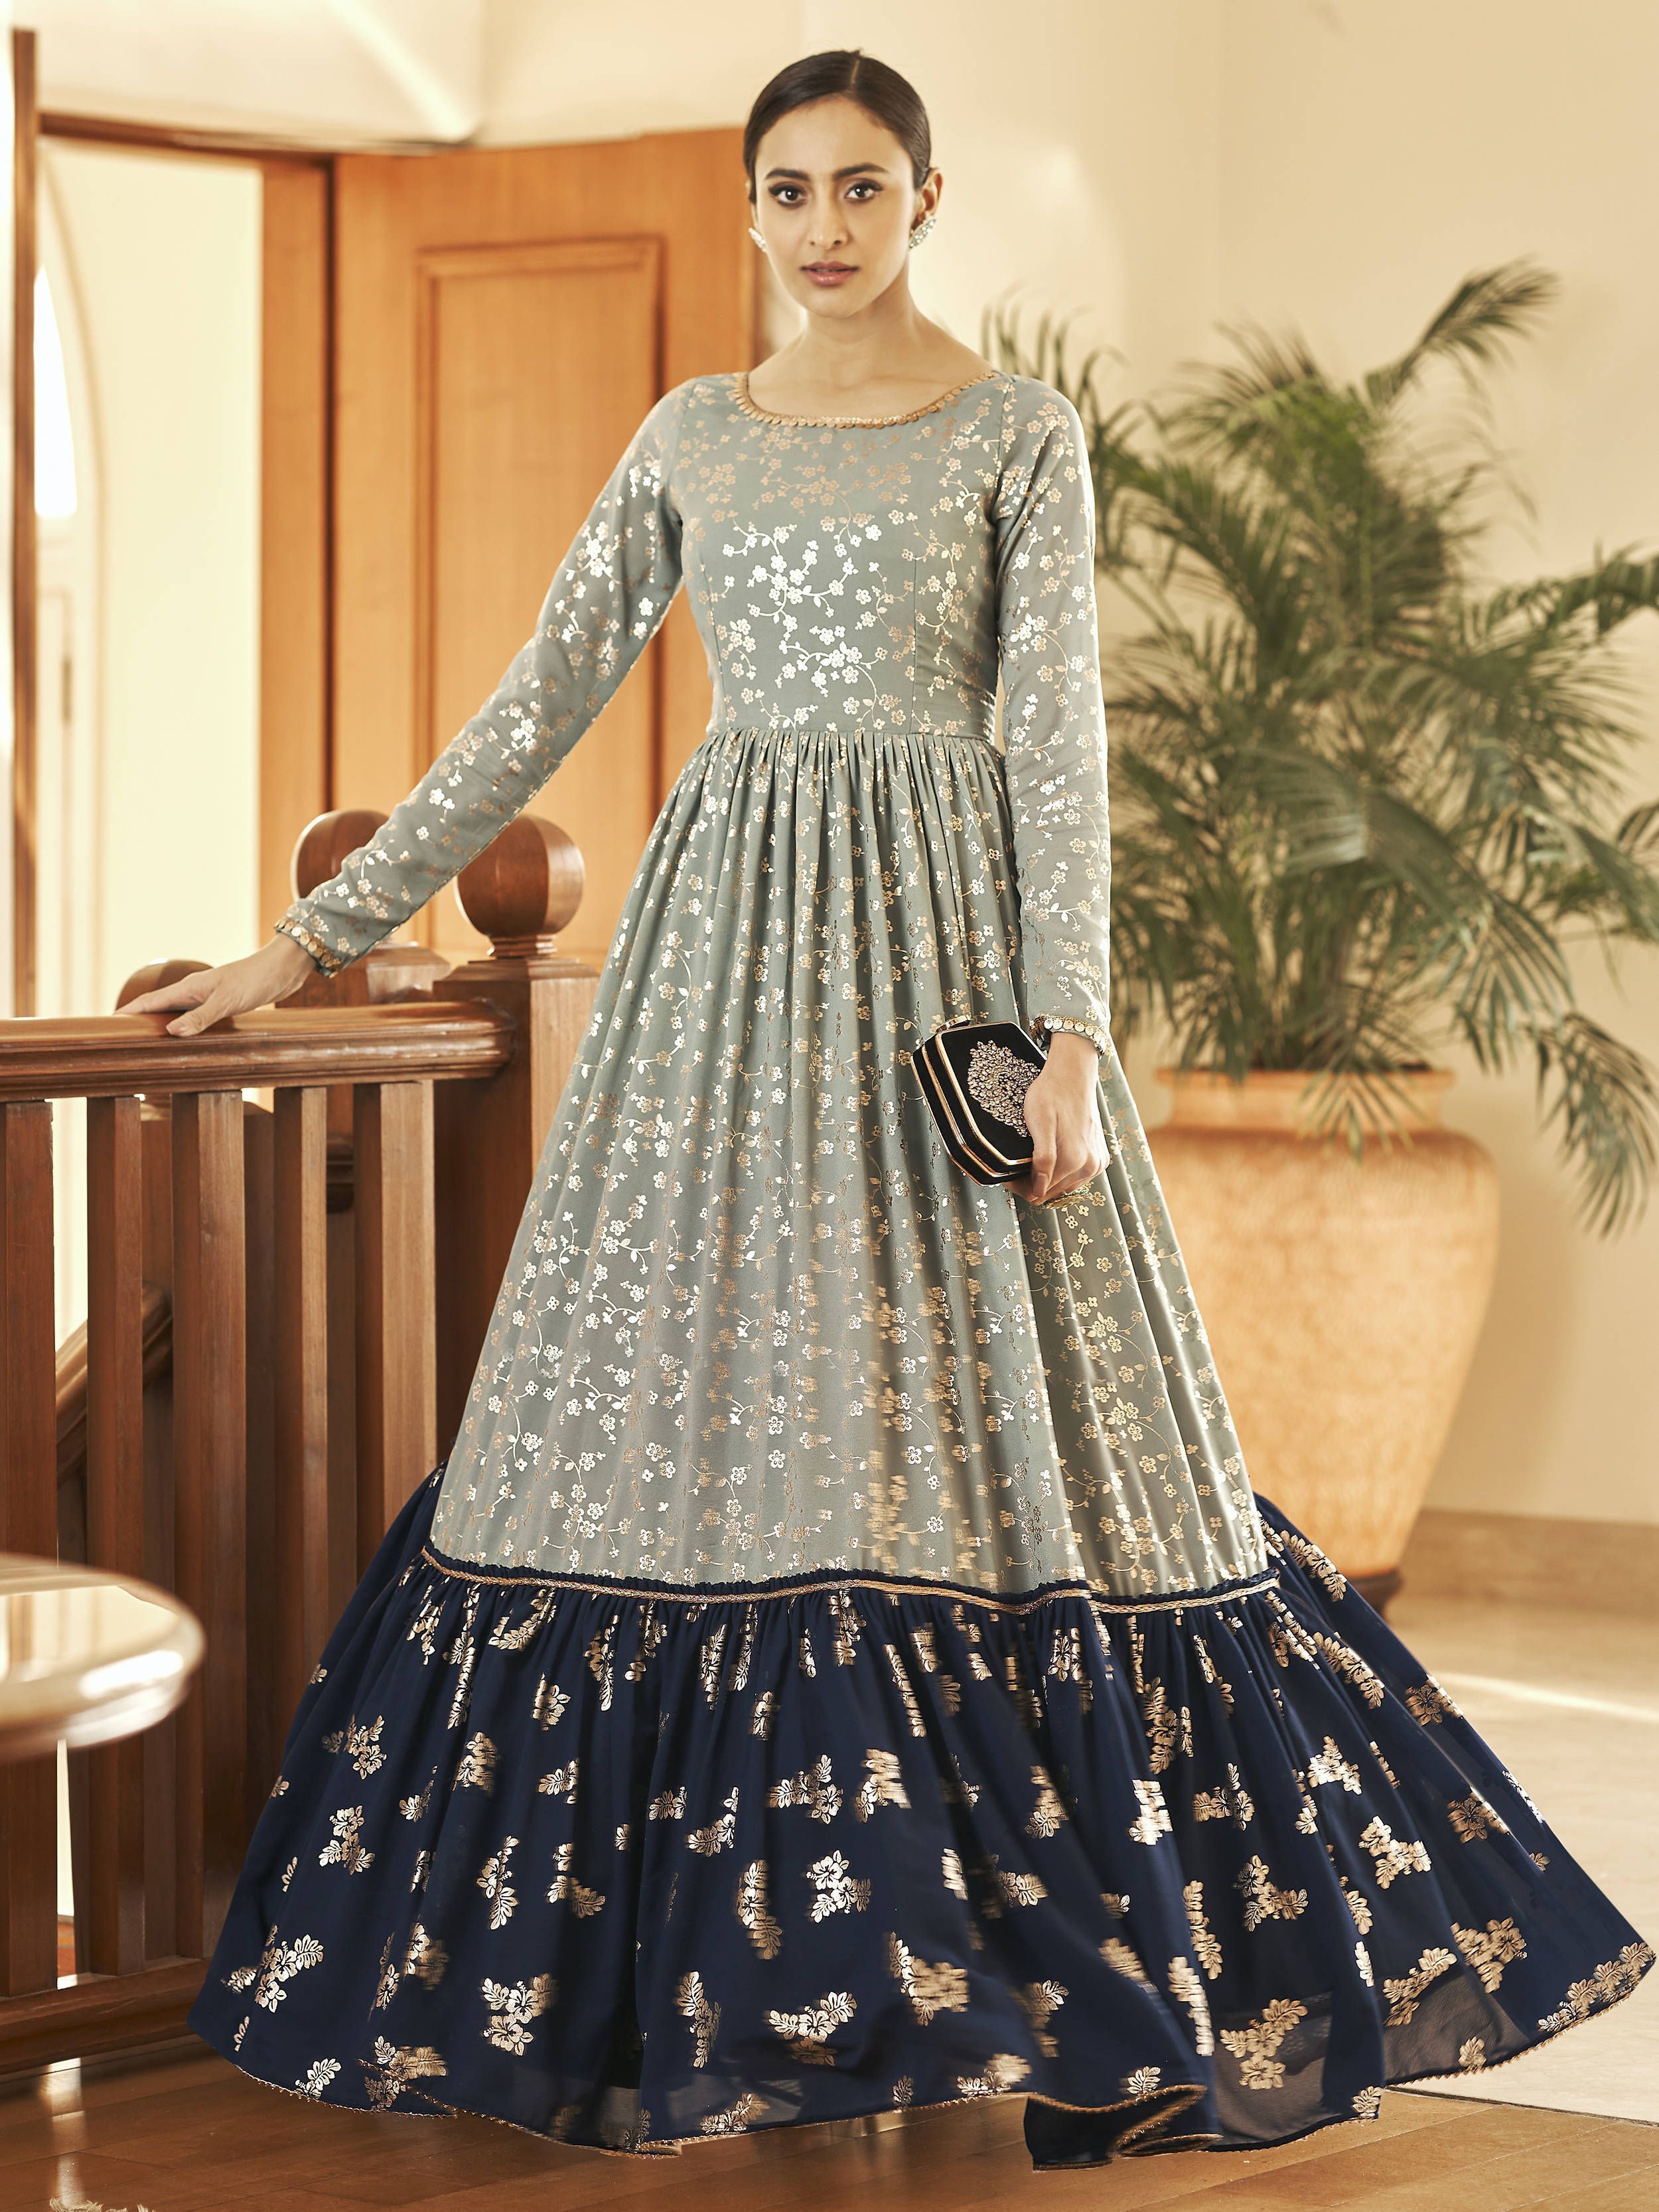 Most Attractive & Appealing Indian Party Wear Gown Dresses Designs Ideas  2022 | Indian party wear gowns, Gown dress design, Long gown design